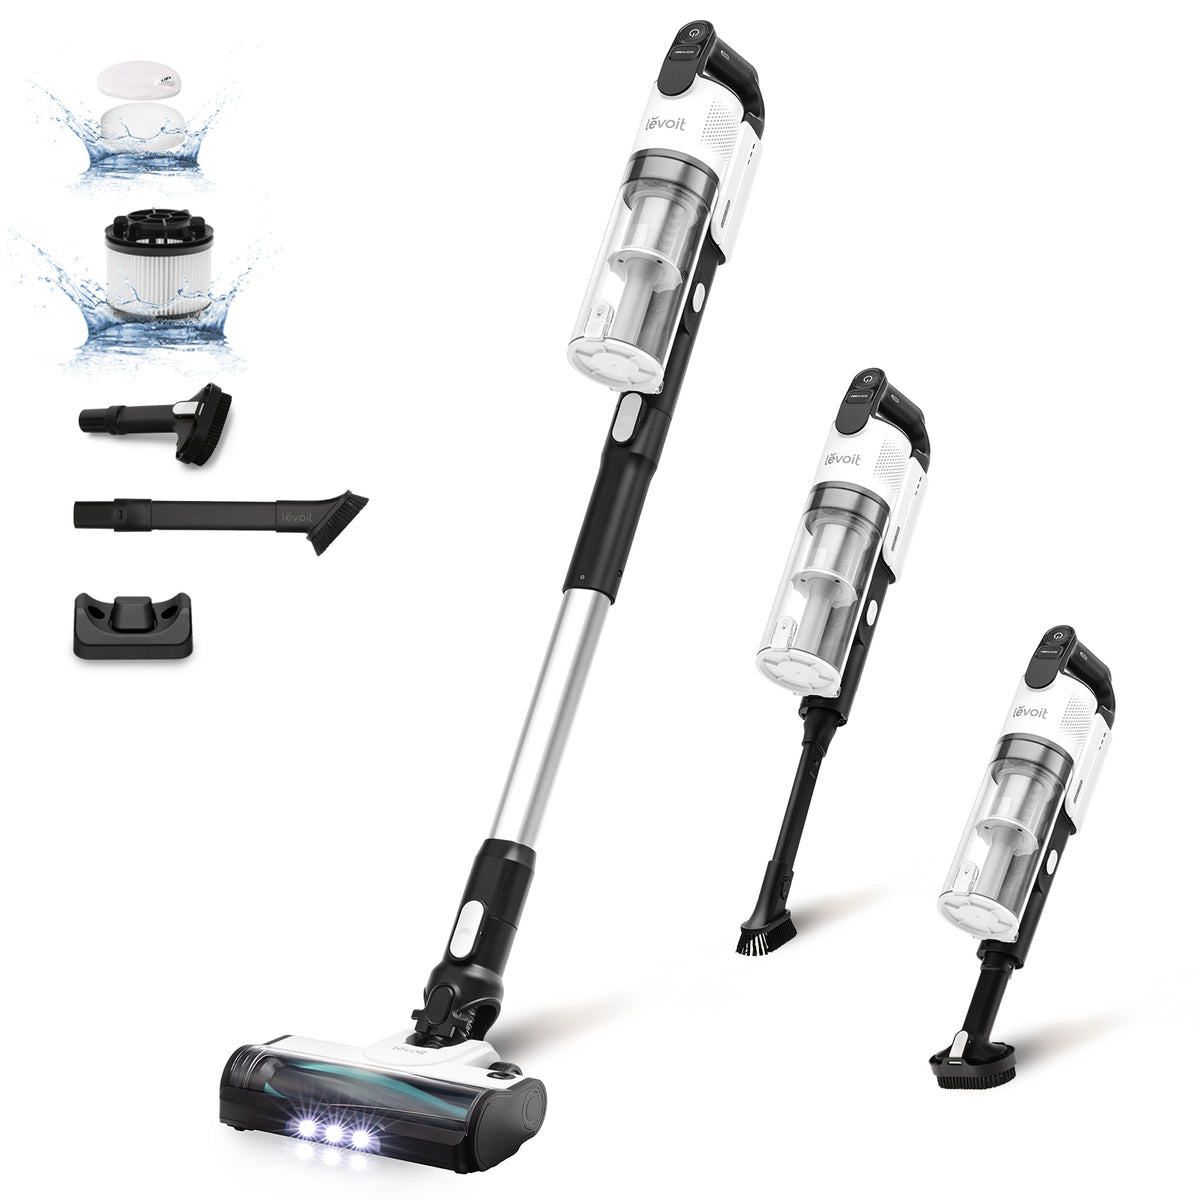 Levoit LVAC-200 Cordless Vacuum Cleaner with Anti Hair Wrap Pet Hair Nozzle 4 in 1 Vacuum Cleaner